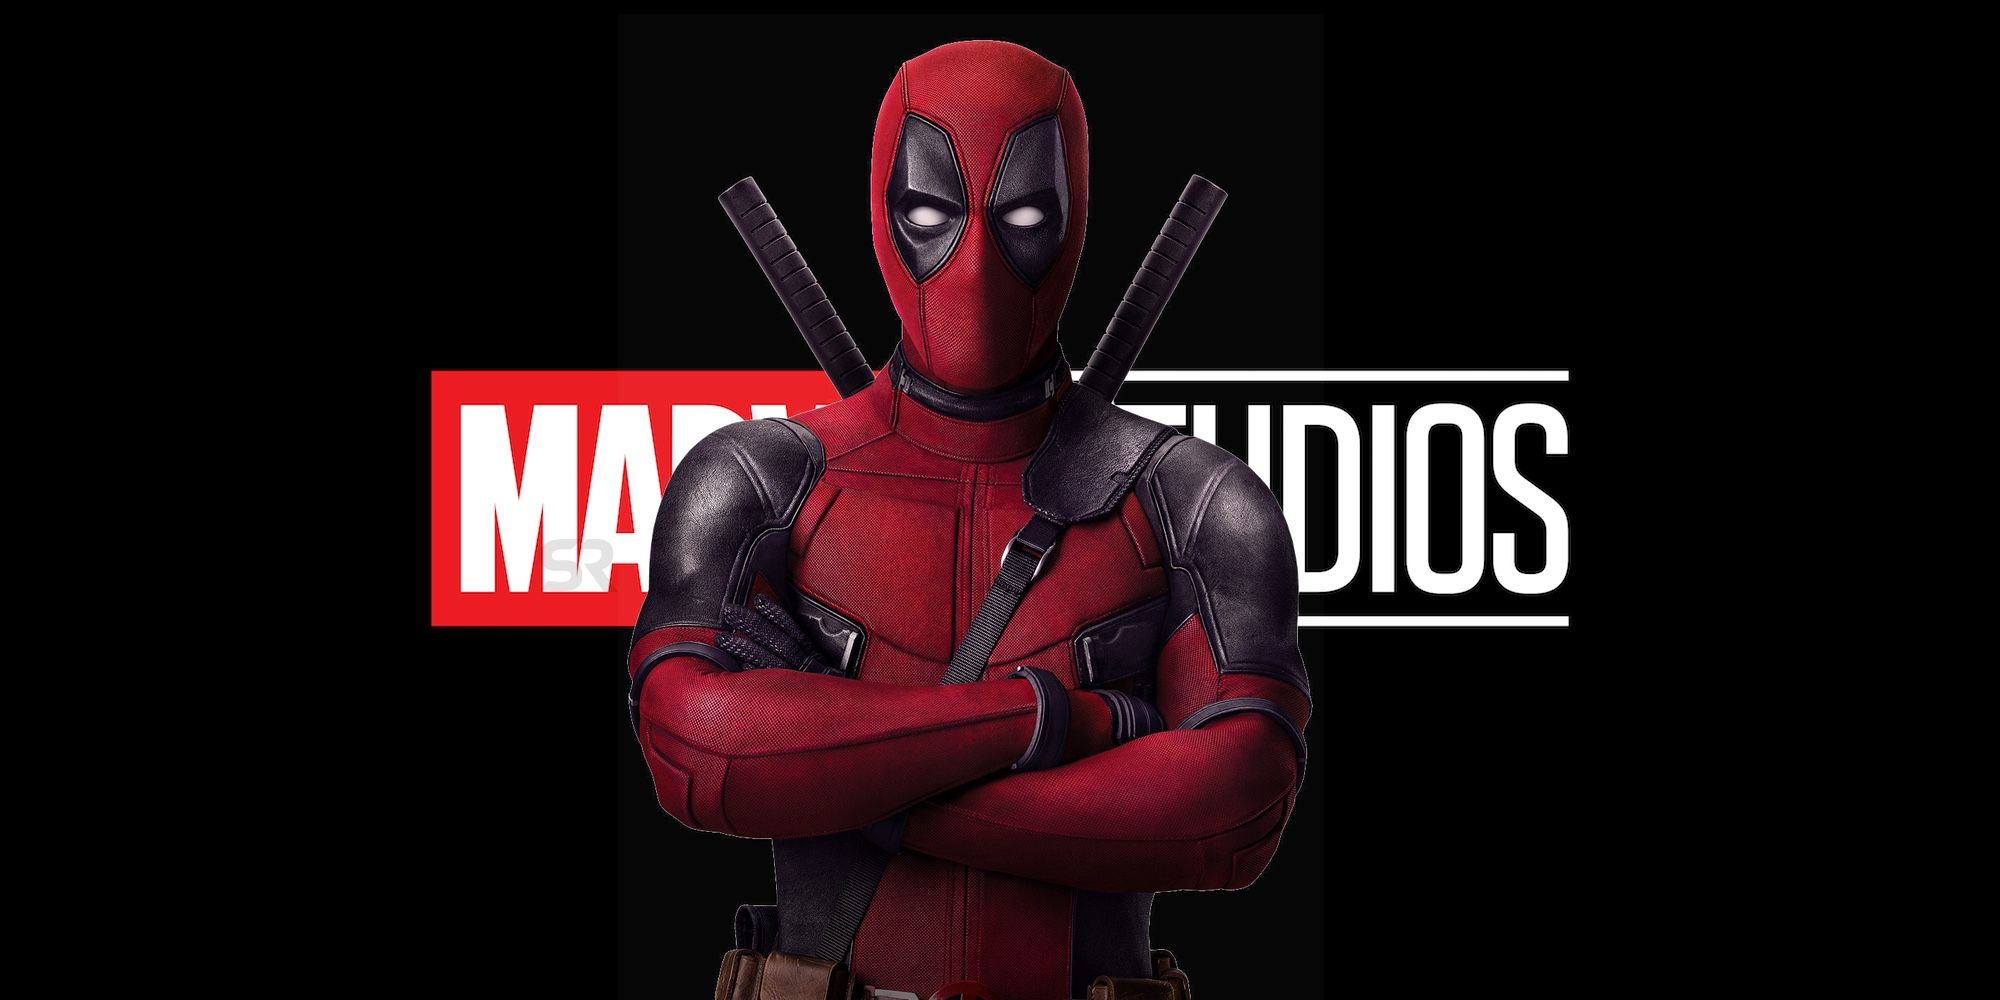 Next Deadpool Movie Will Be R Rated Despite Being At Marvel